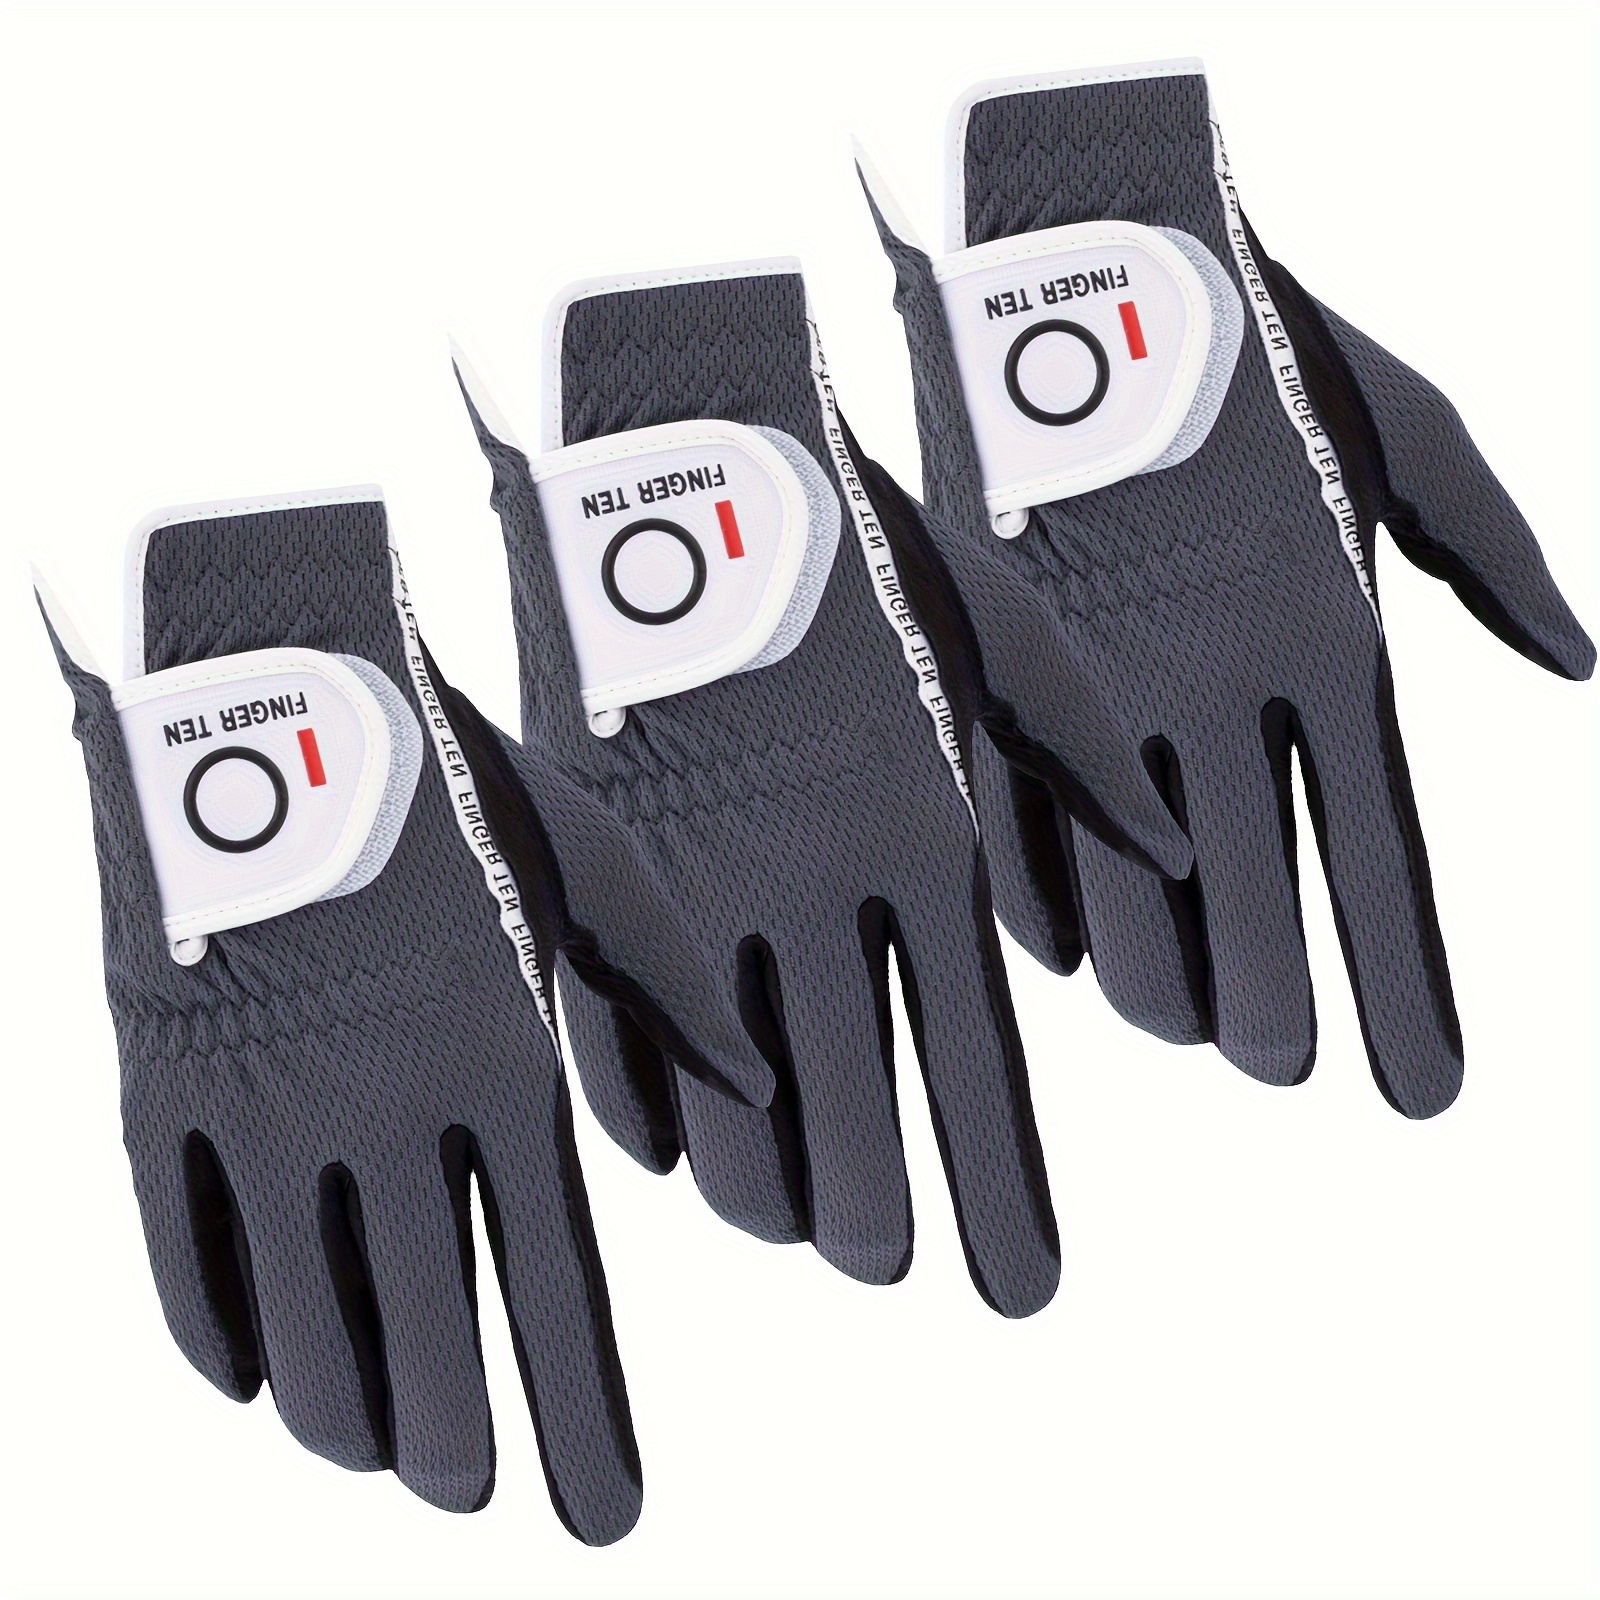 3 pack men's golf gloves for right left handed golfer, all weather performance, s/m/l/xl/xxl gray worn on left hand s 0